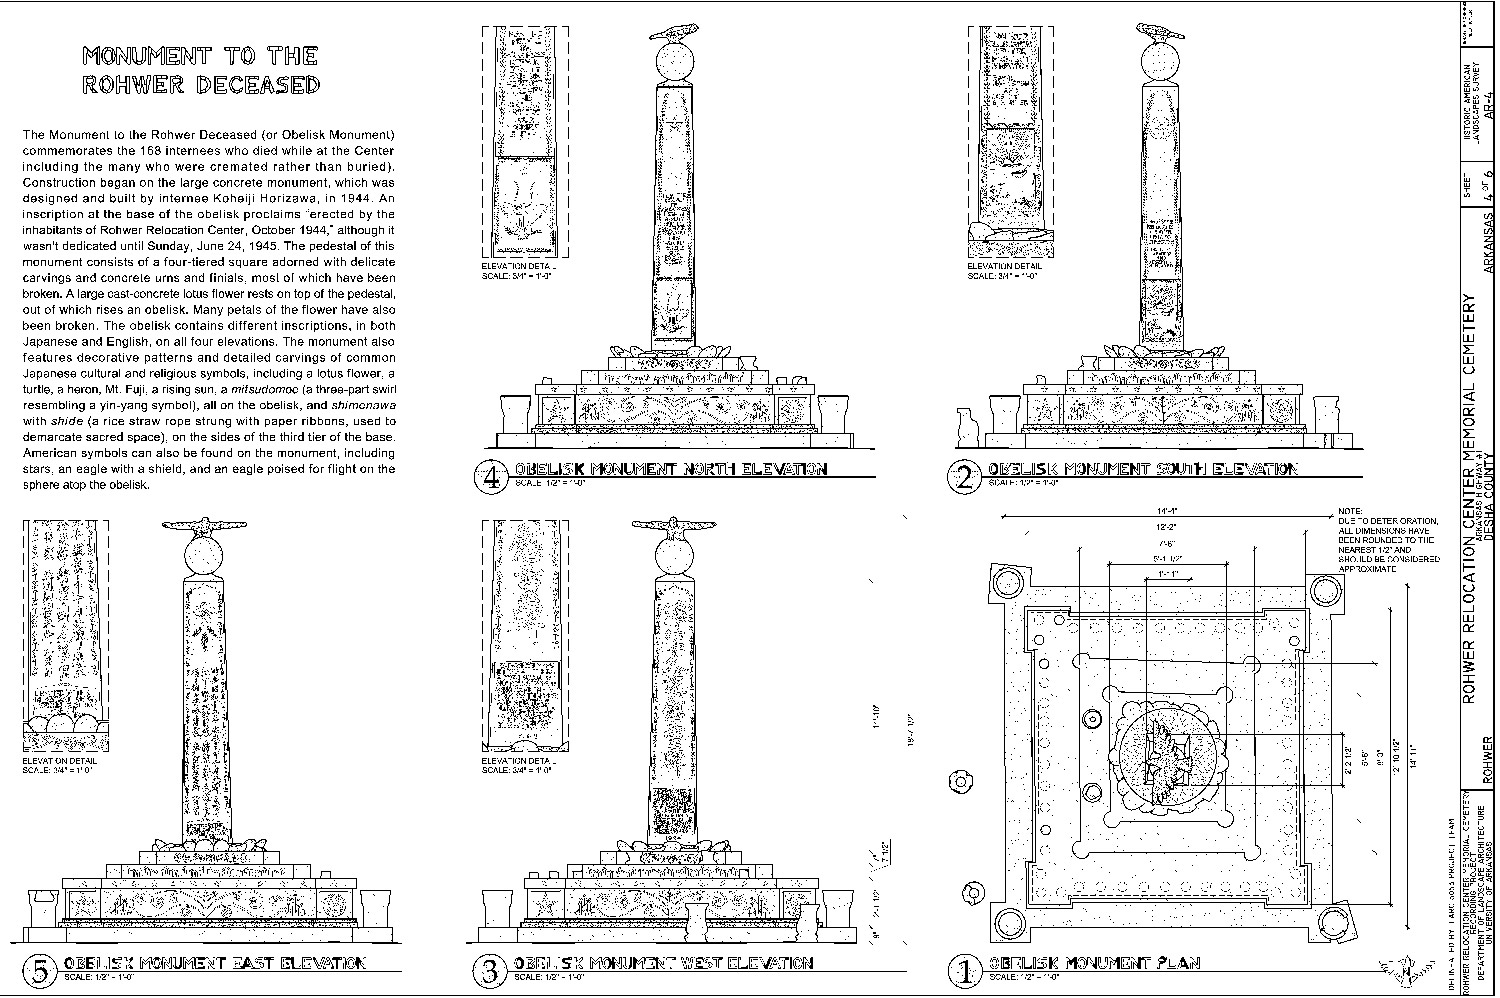 Line drawings of monument from various angles